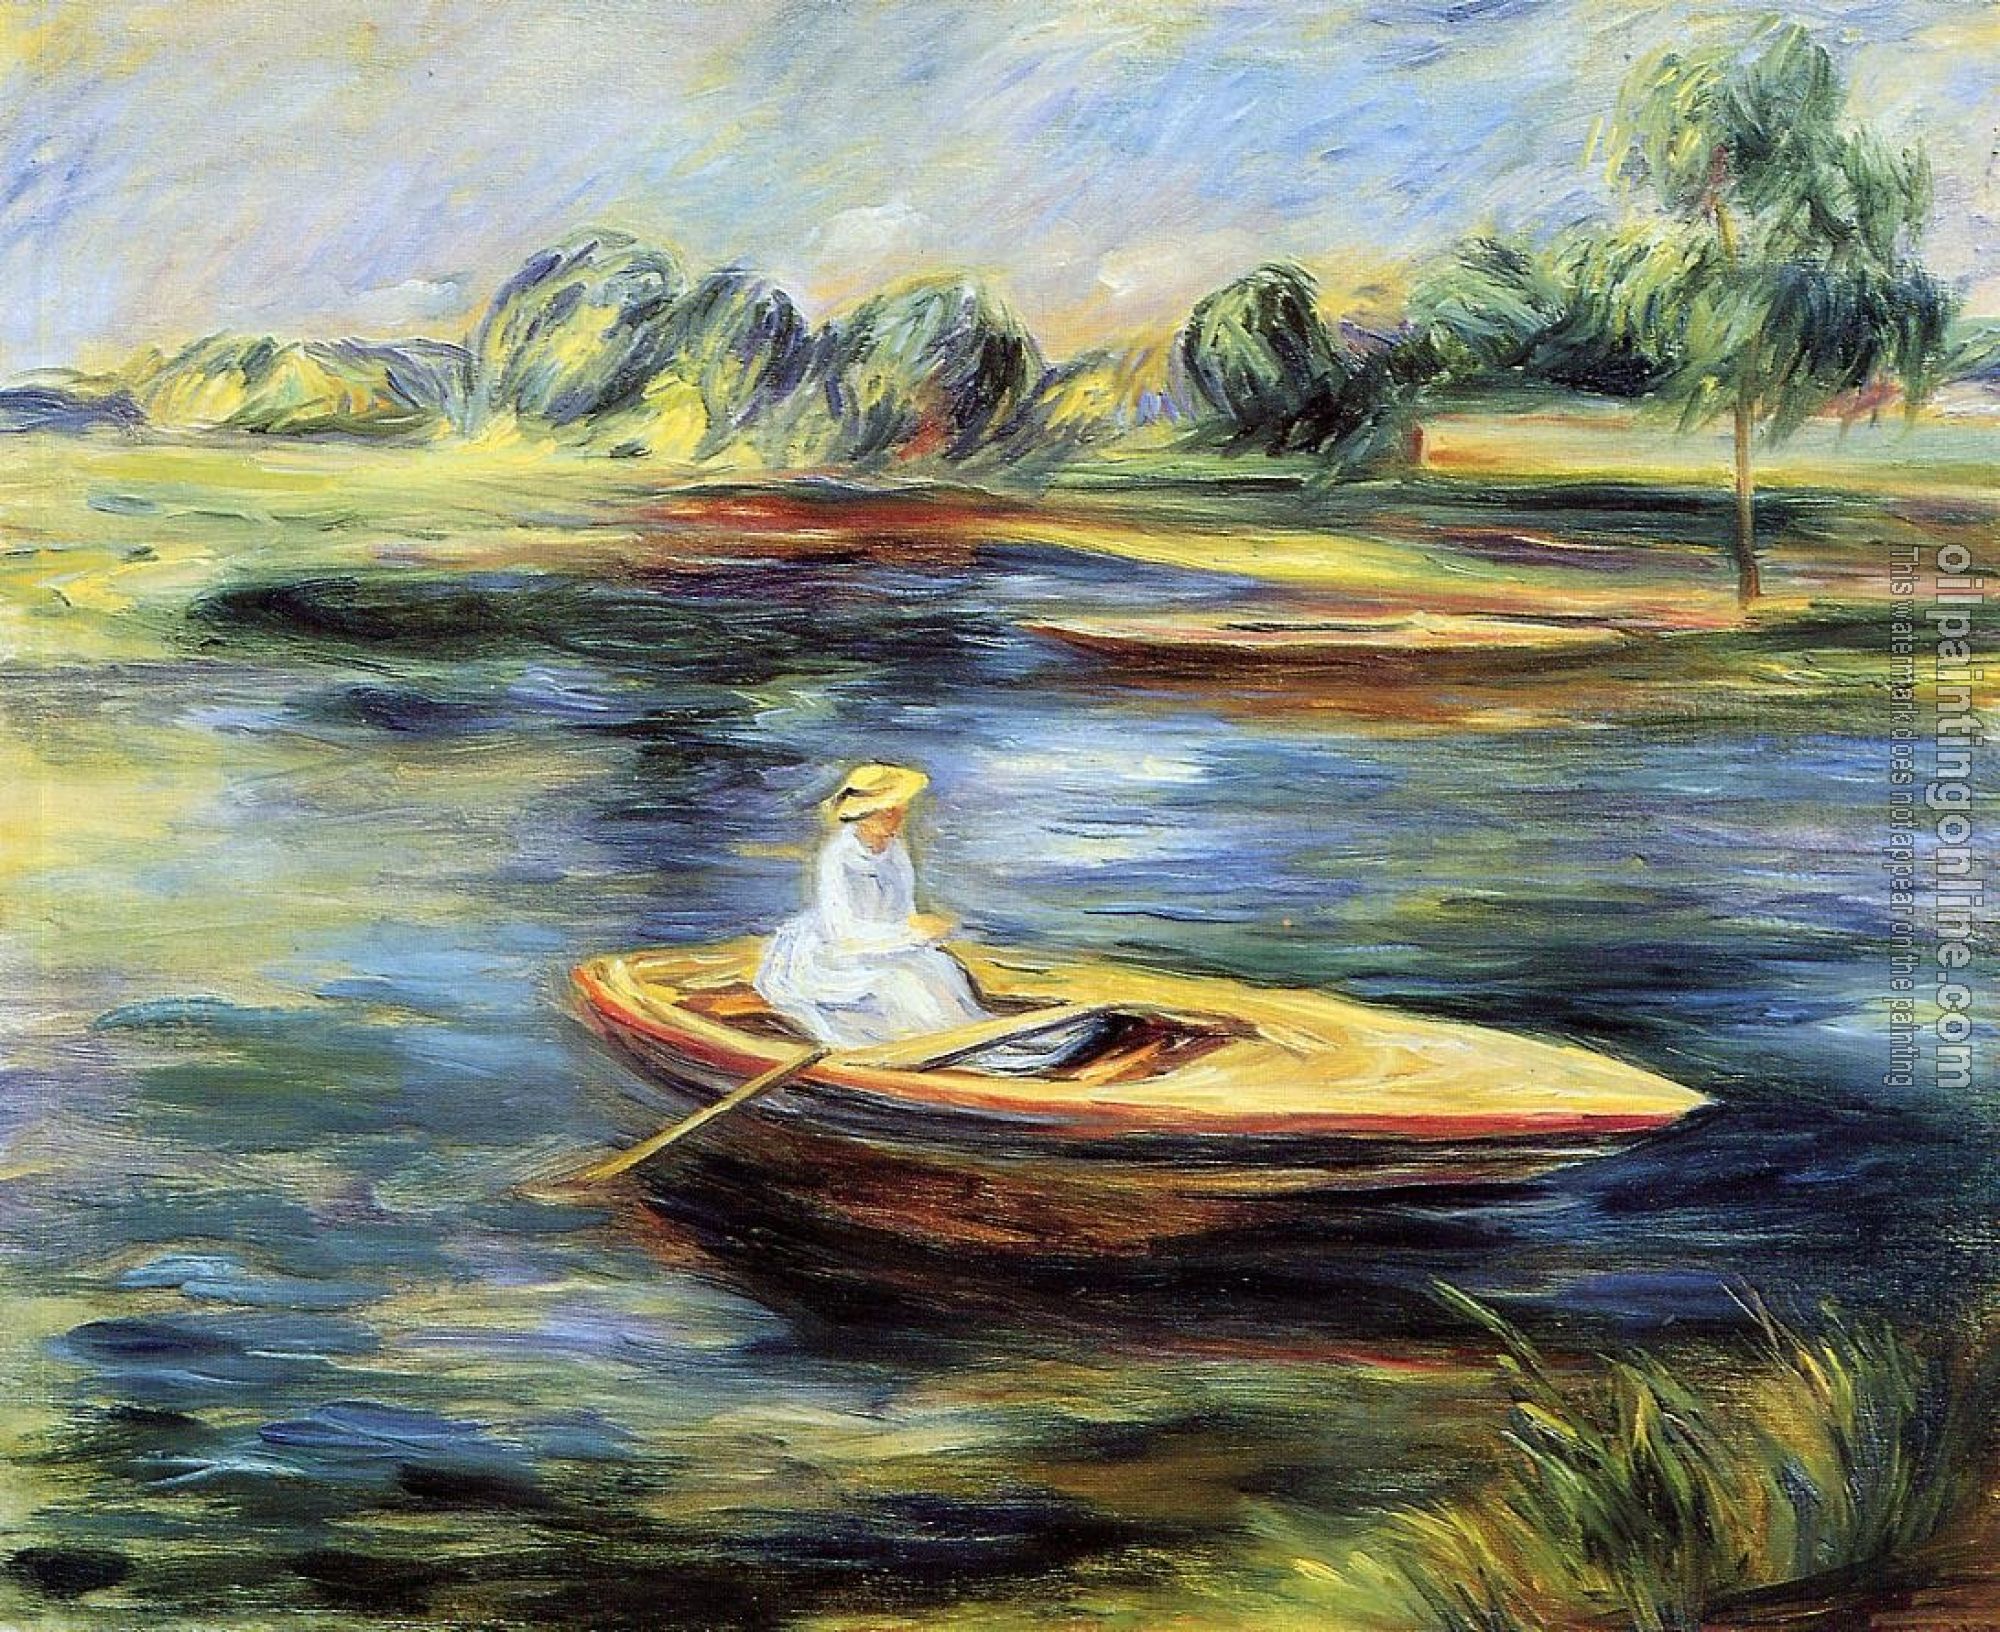 Renoir, Pierre Auguste - Young Woman Seated in a Rowboat